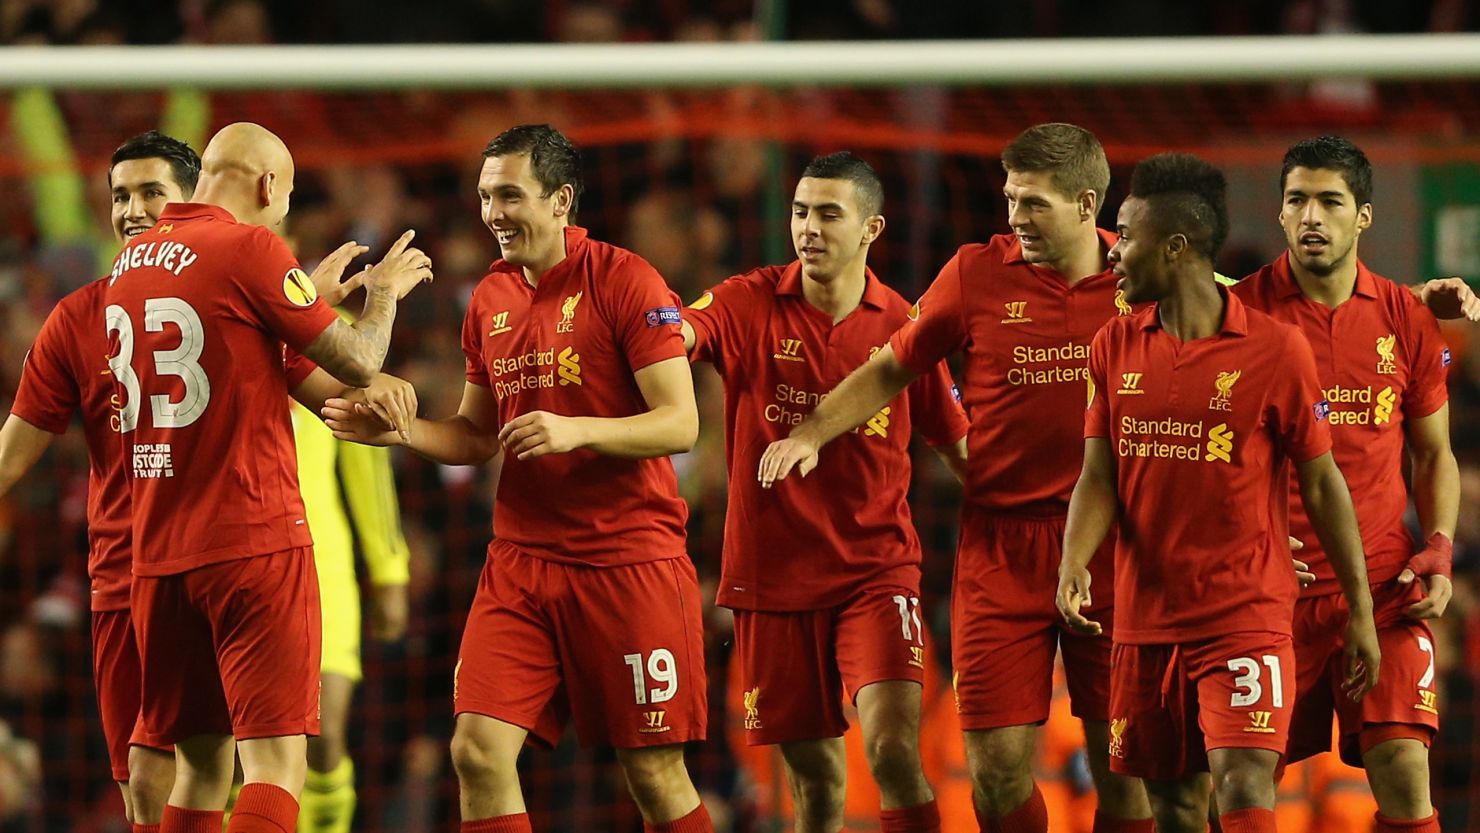 Stewart Downing (19) is congratulated by his teammates after scoring the winner for Liverpool against Anzhi